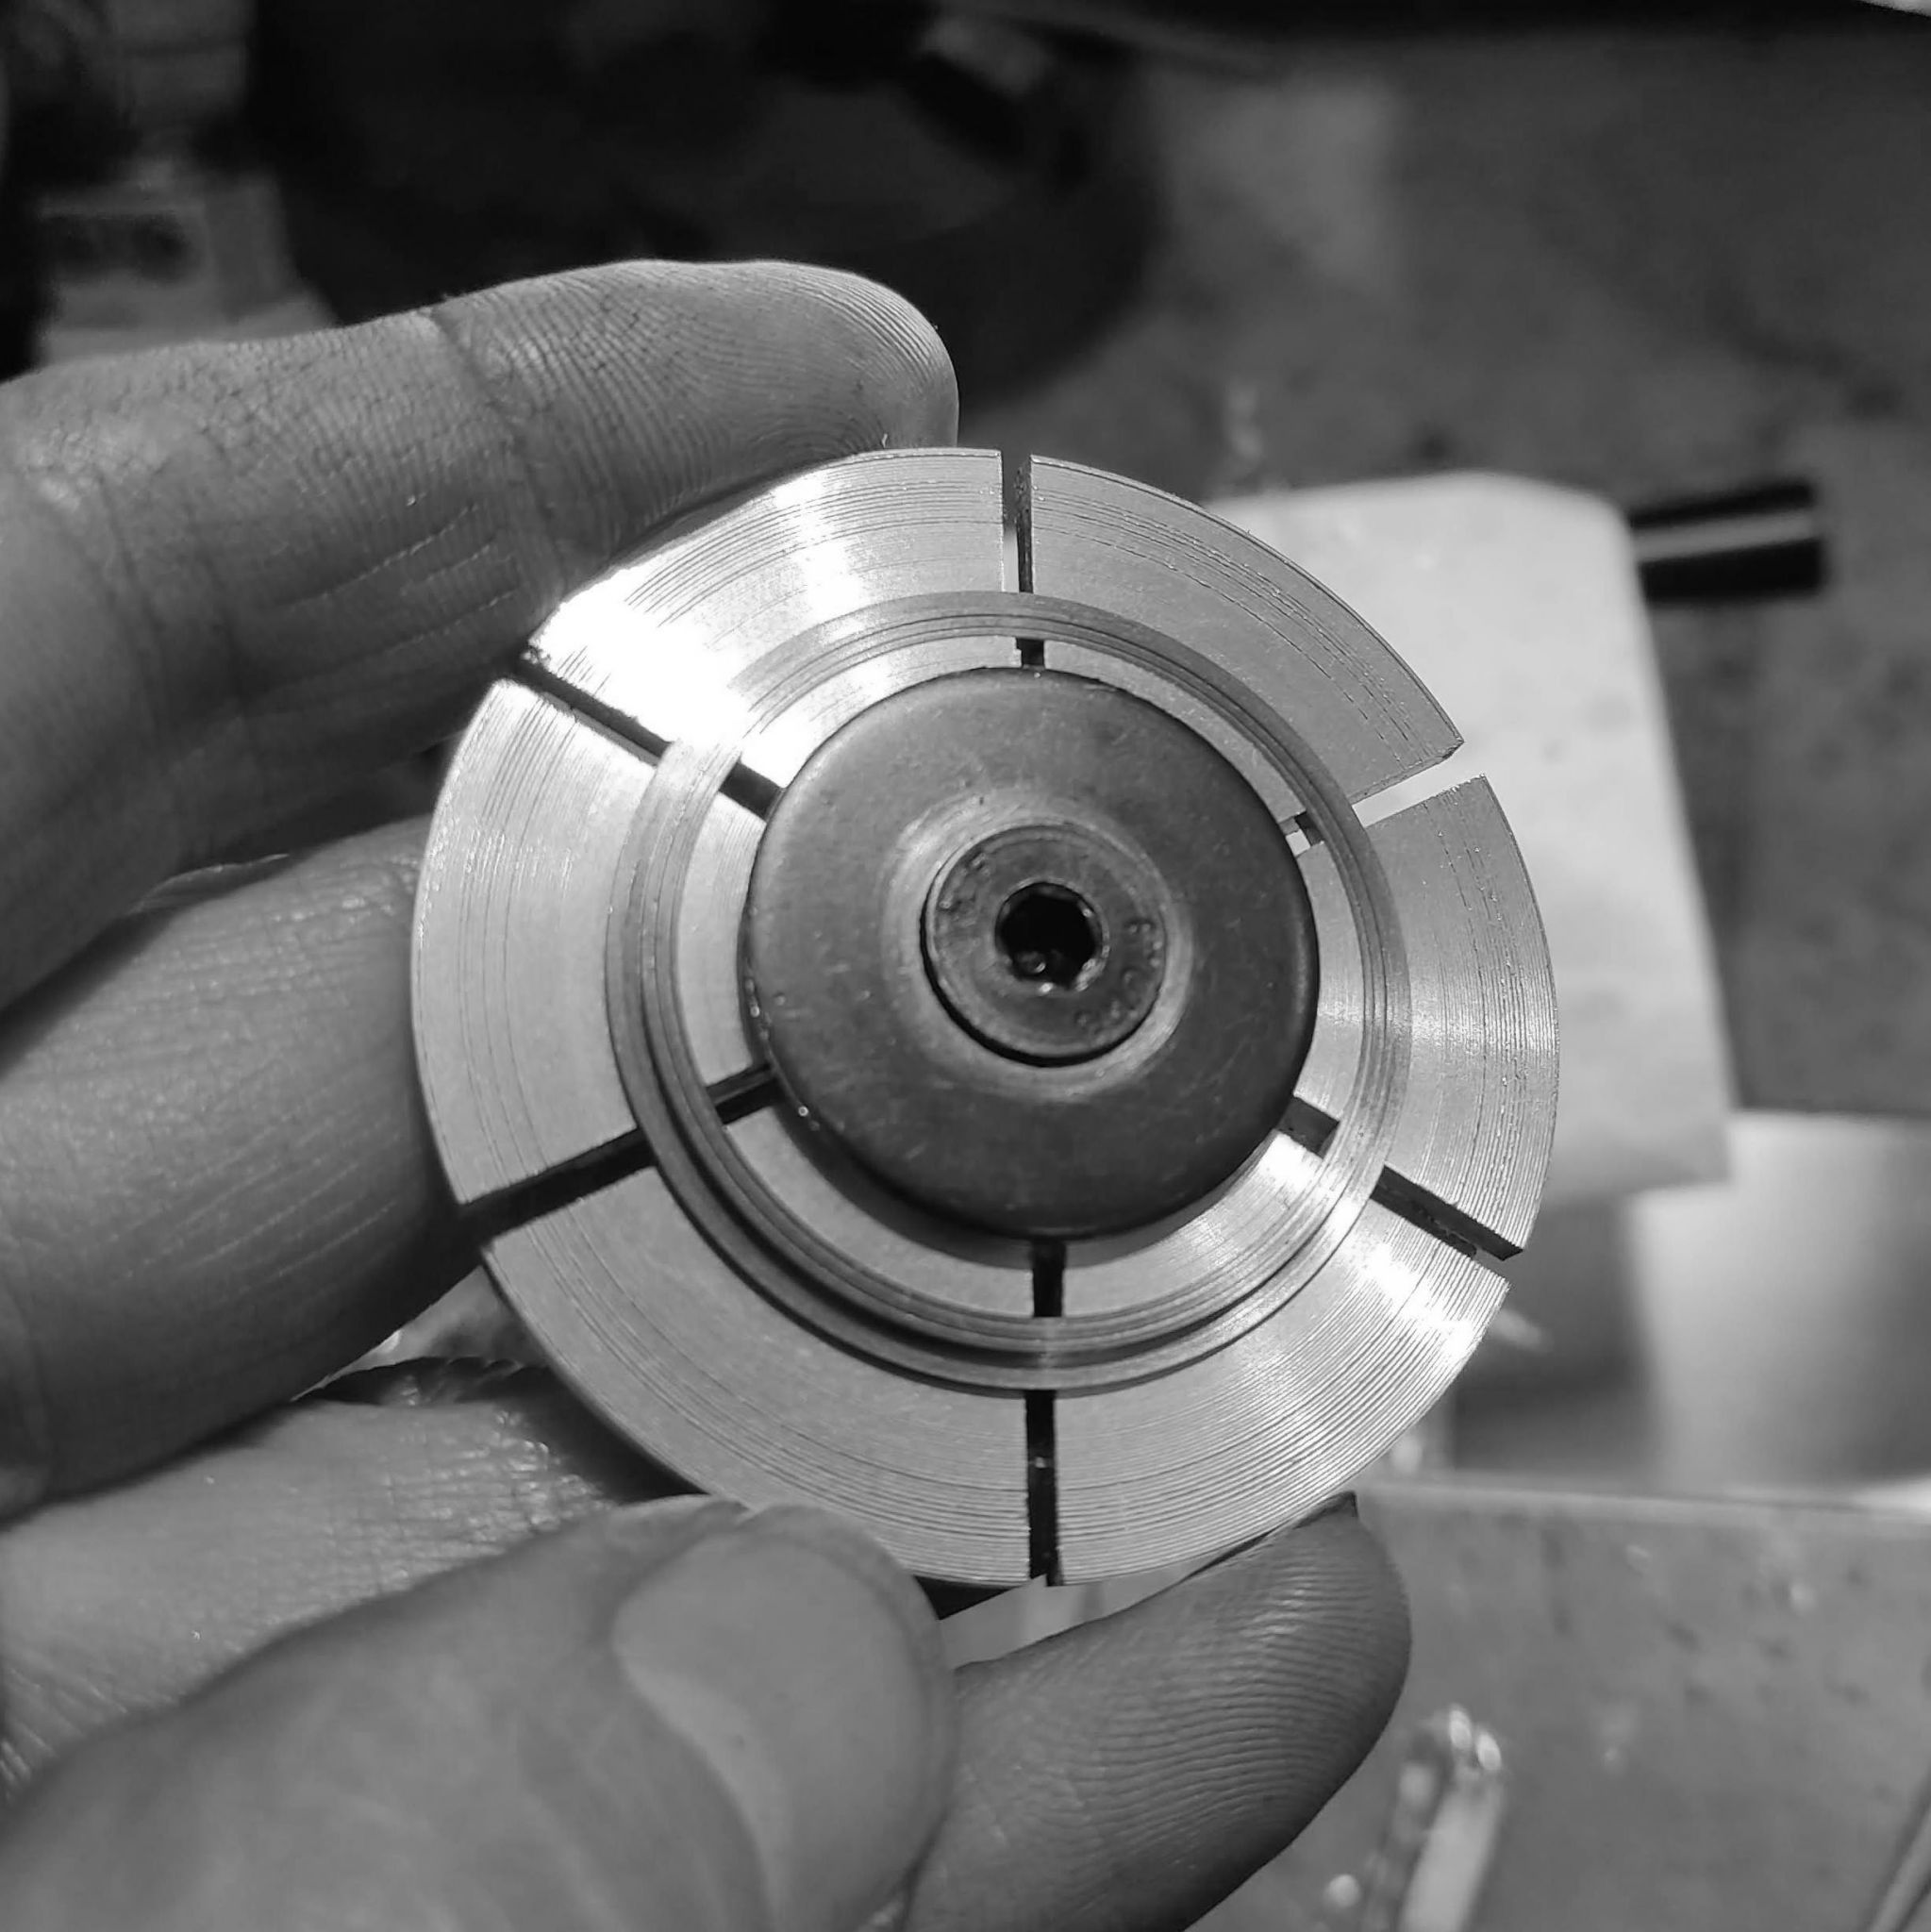 The dial being held by the expanding collet jig. The center screw is tightened, forcing the jaws outwards, and securely holding the dial.